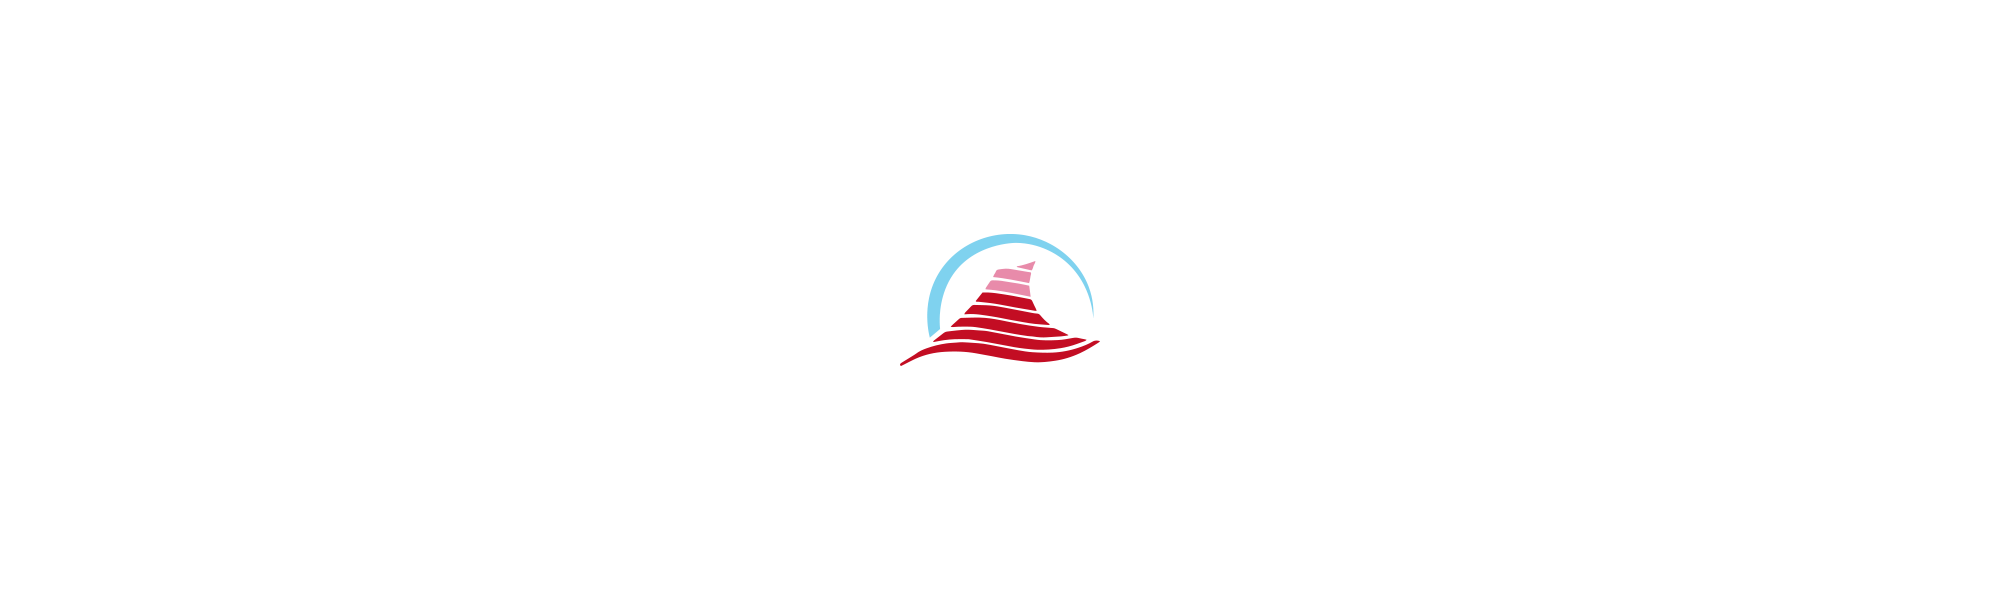 parallax_front